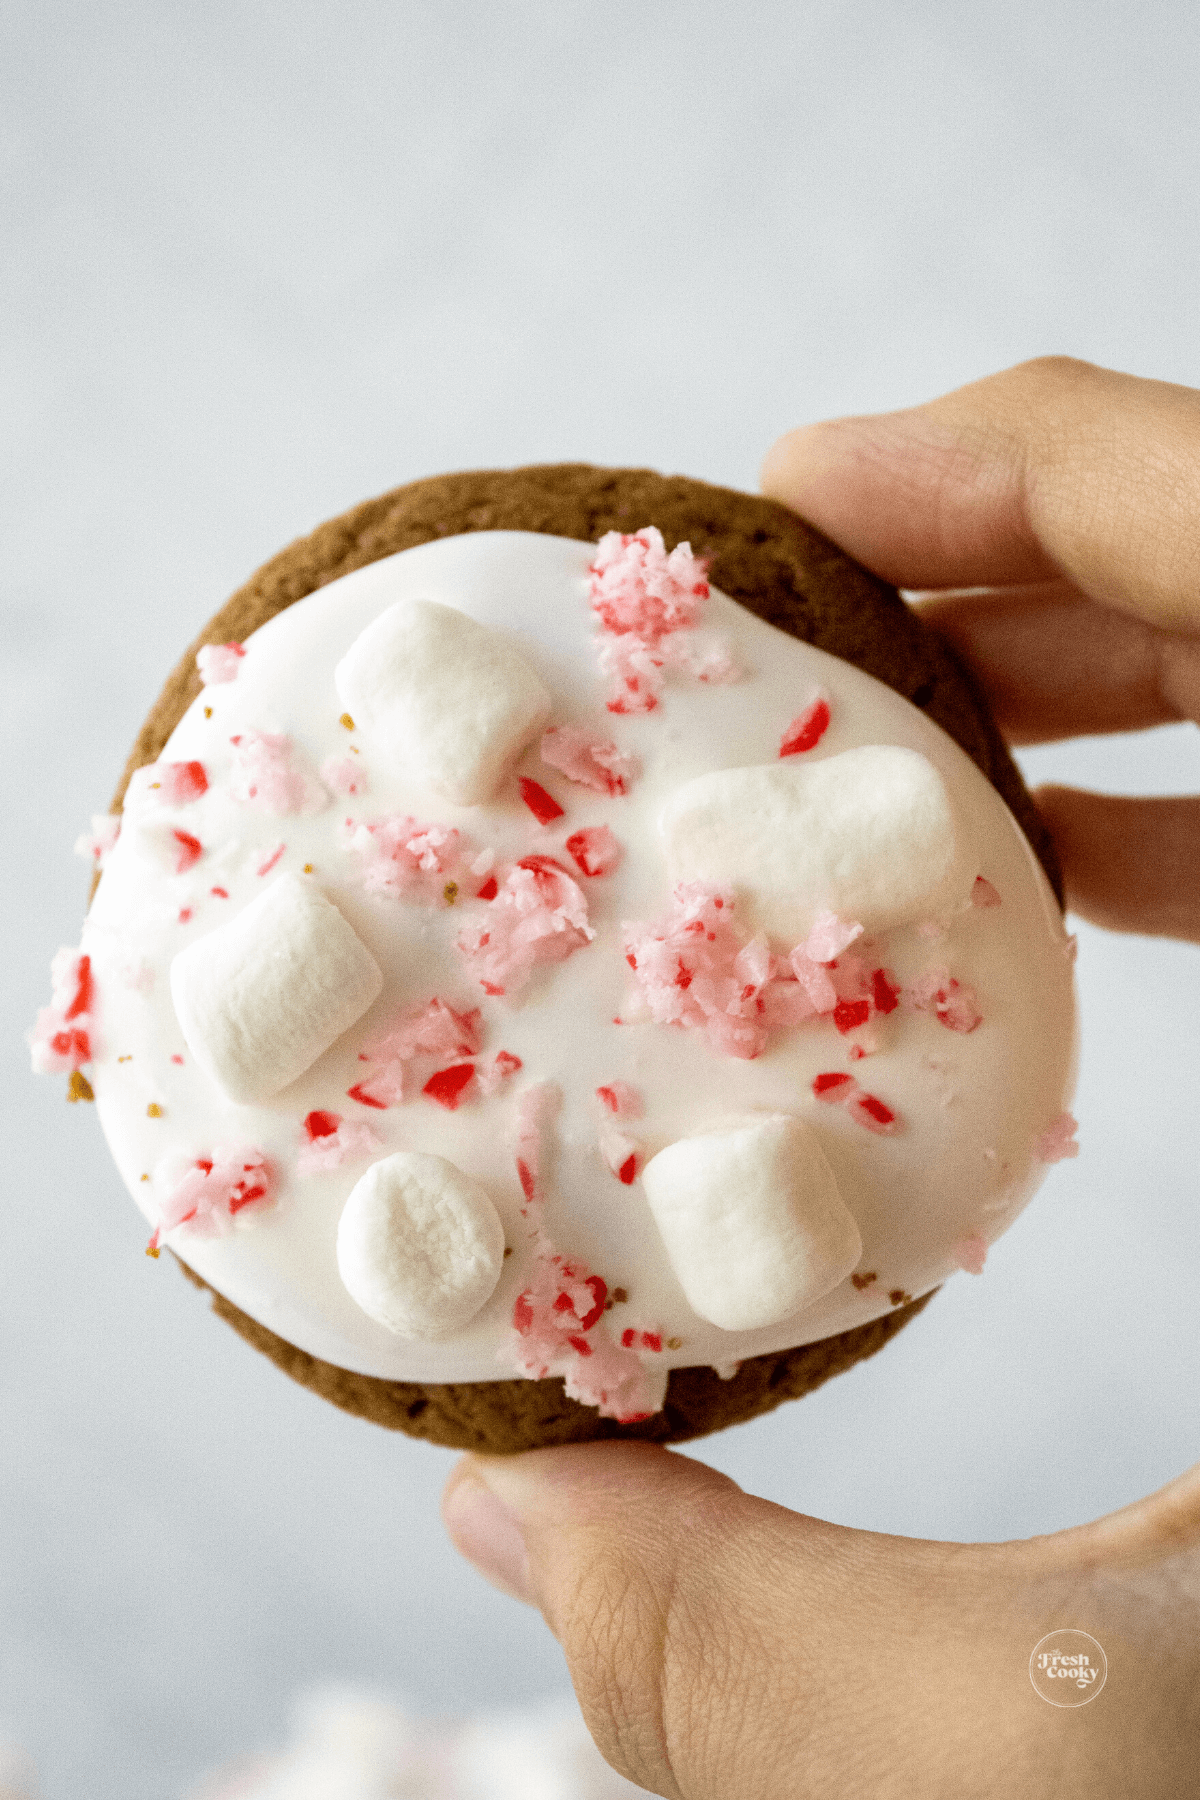 Hand holding hot chocolate cookie topped with marshmallow fluff and crushed candy canes.